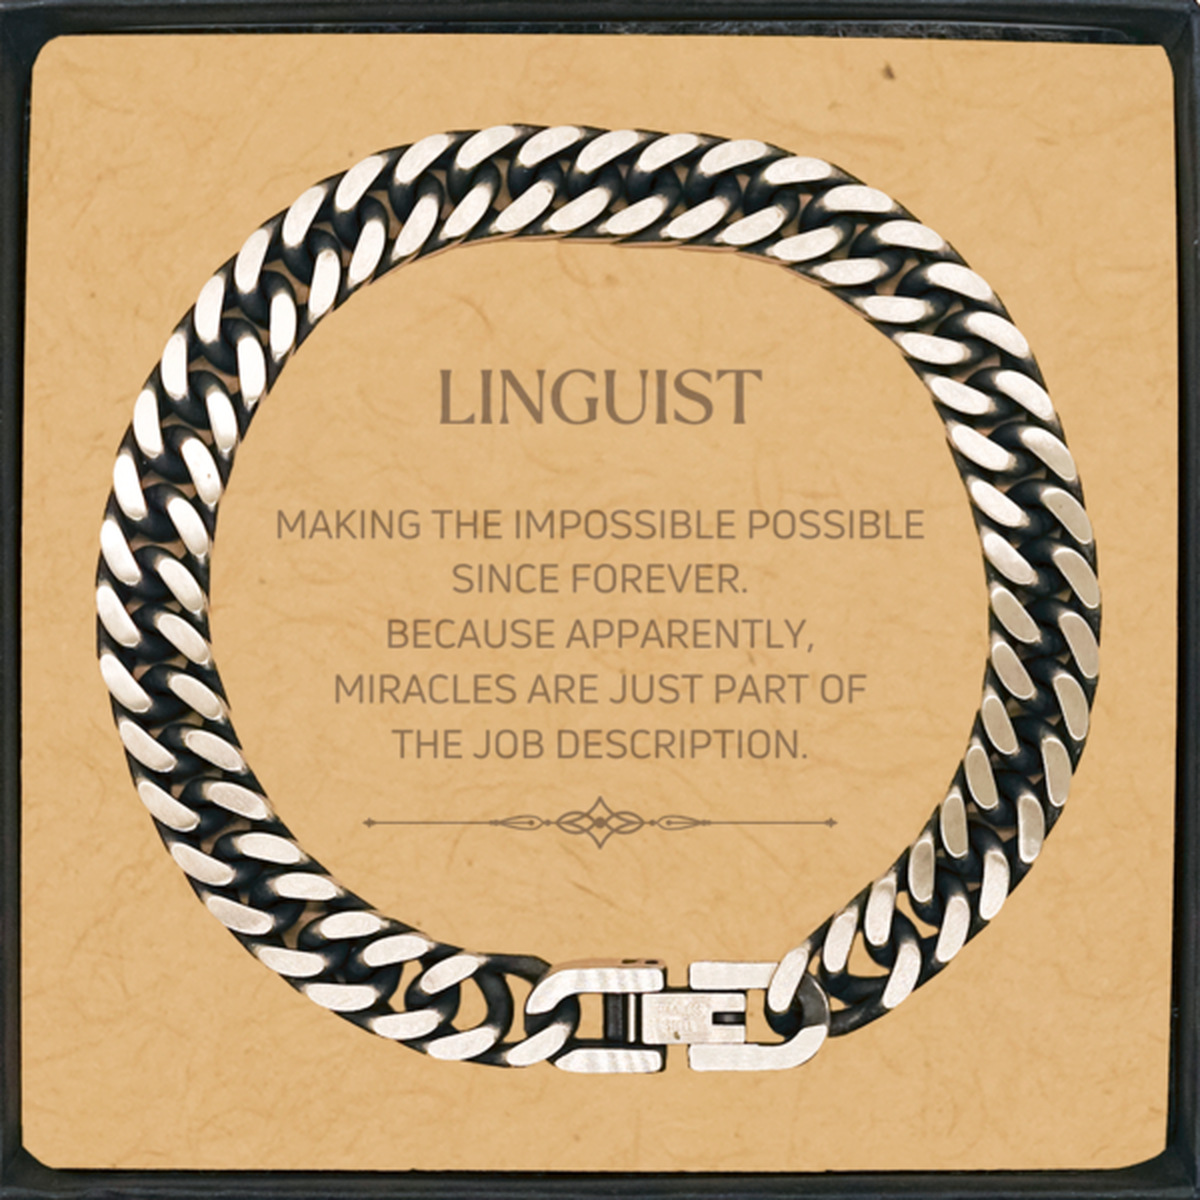 Funny Linguist Gifts, Miracles are just part of the job description, Inspirational Birthday Cuban Link Chain Bracelet For Linguist, Men, Women, Coworkers, Friends, Boss